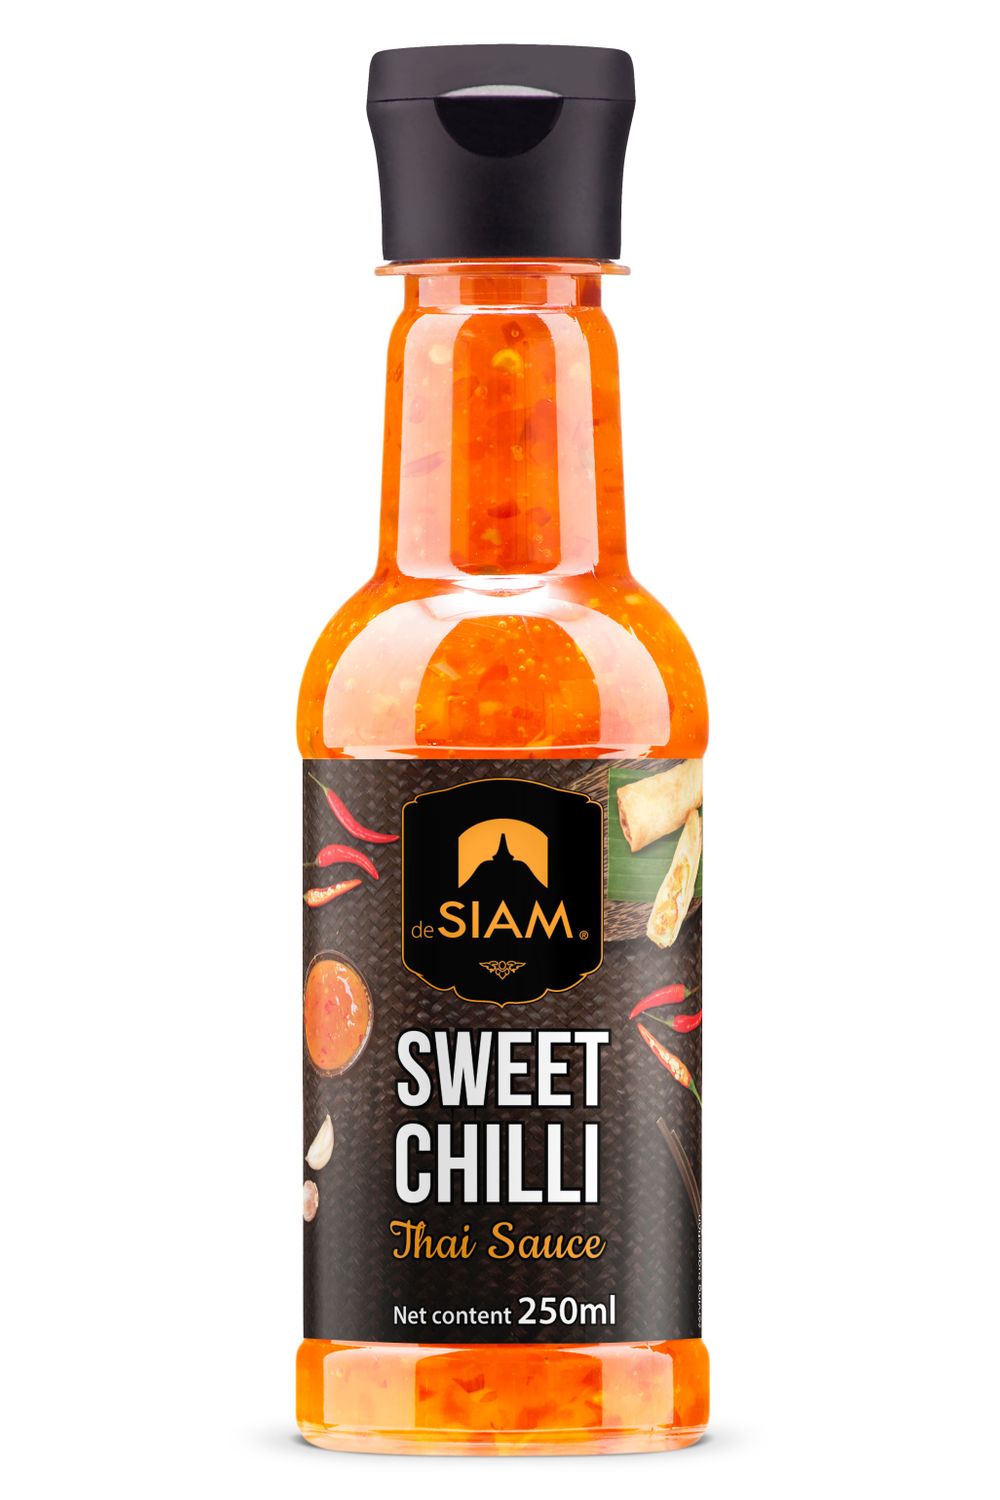 DeSiam Sweet Chili Dipping Sauce